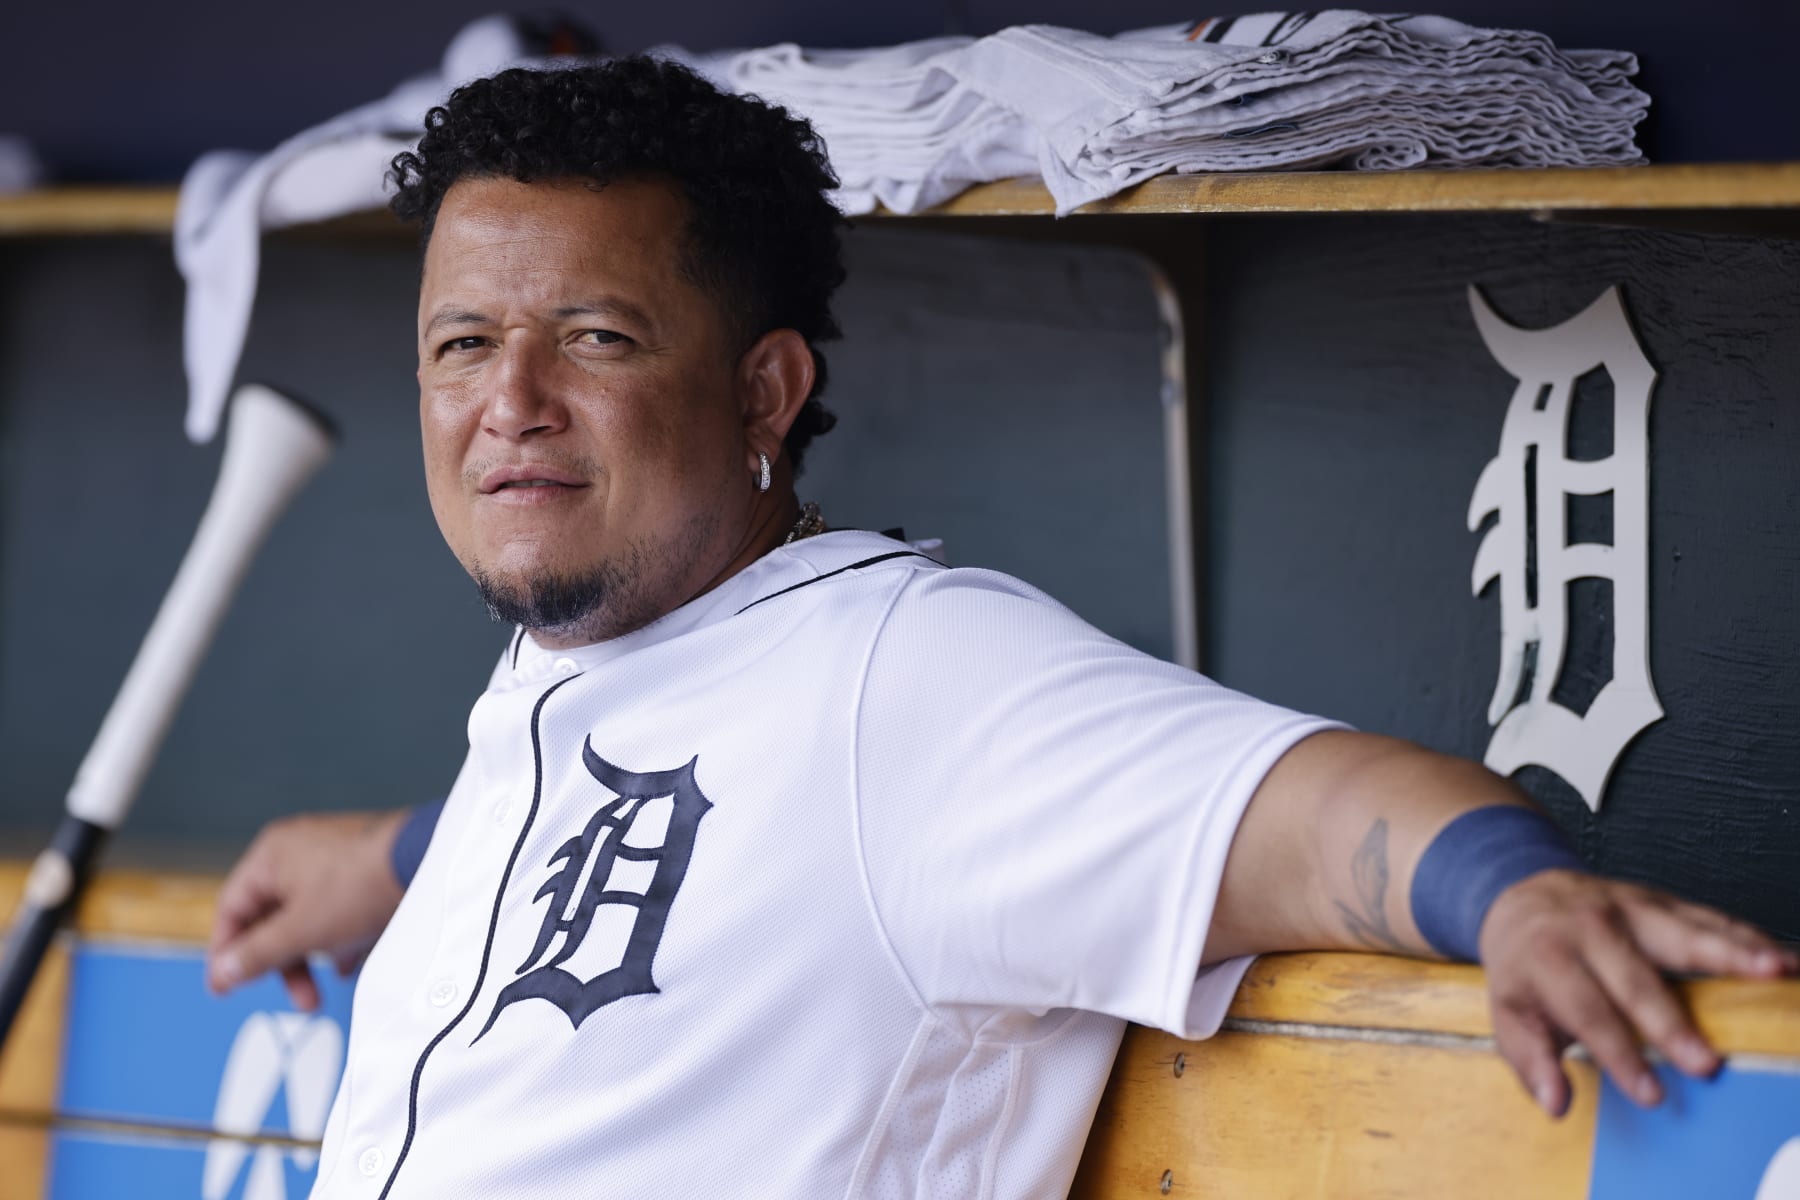 Tigers' Miguel Cabrera Undecided on Retirement: 'I Don't Feel Well